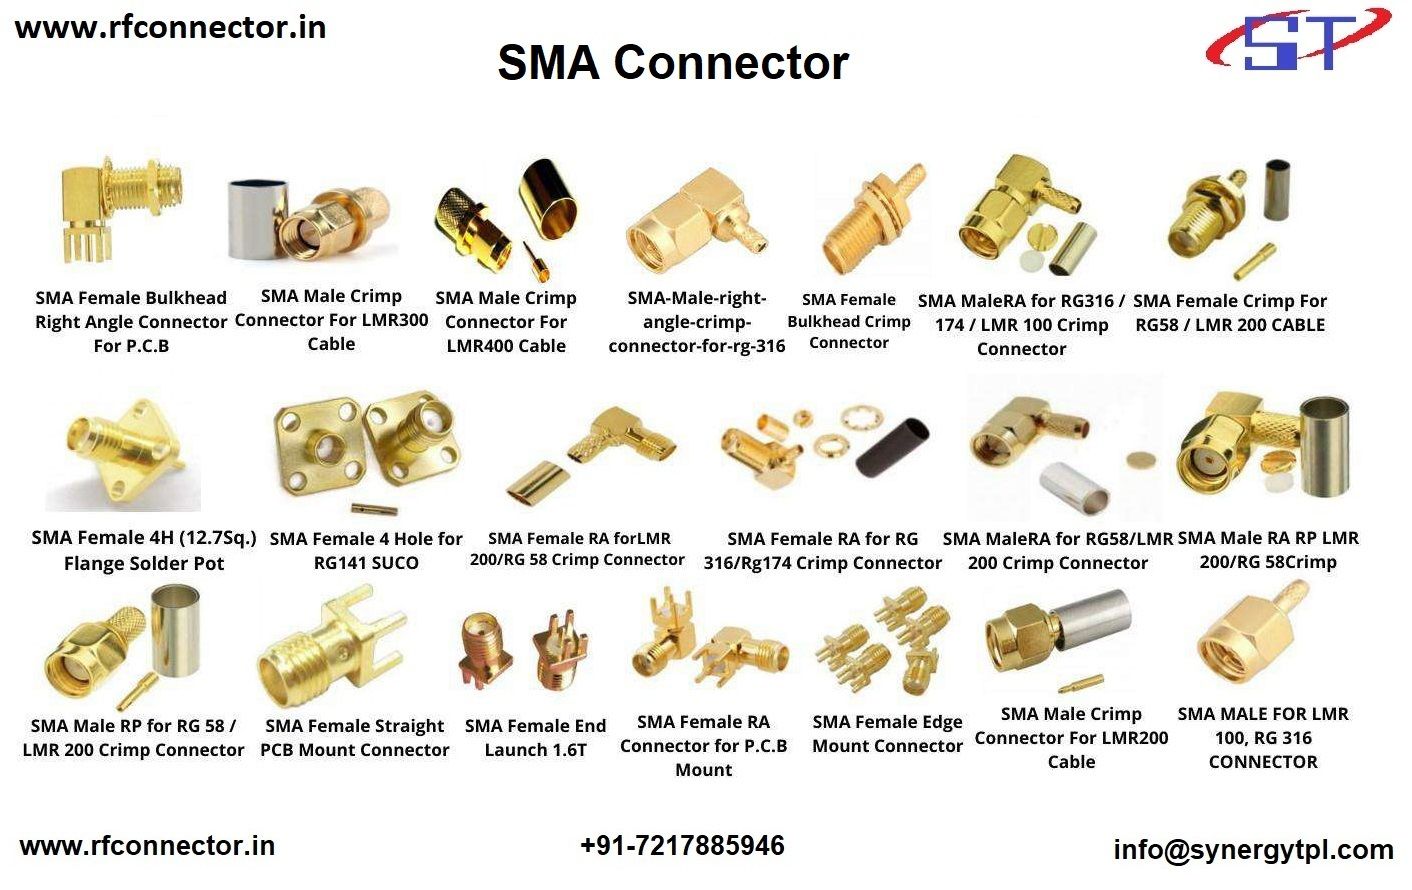 SMA Female Connector for RG 59 cable